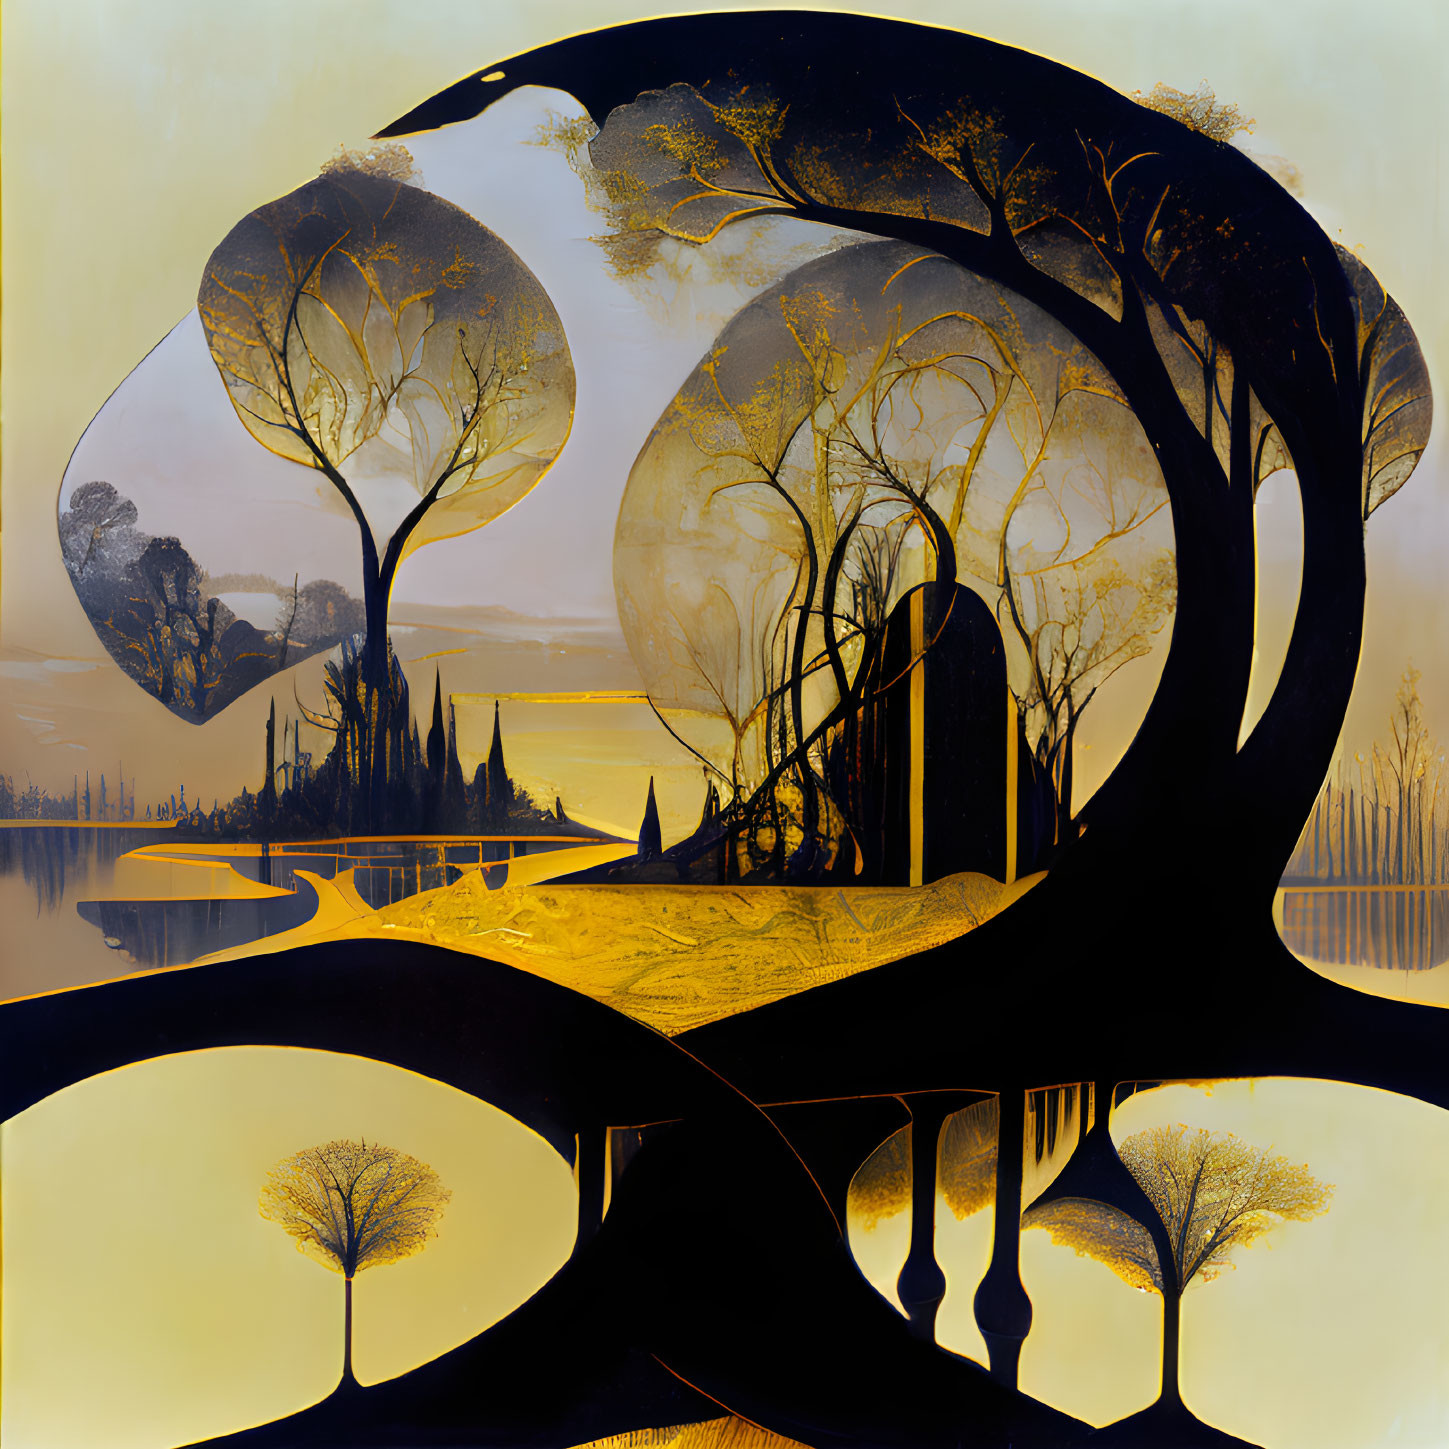 Symmetrical surreal landscape with trees and silhouettes in circular motifs